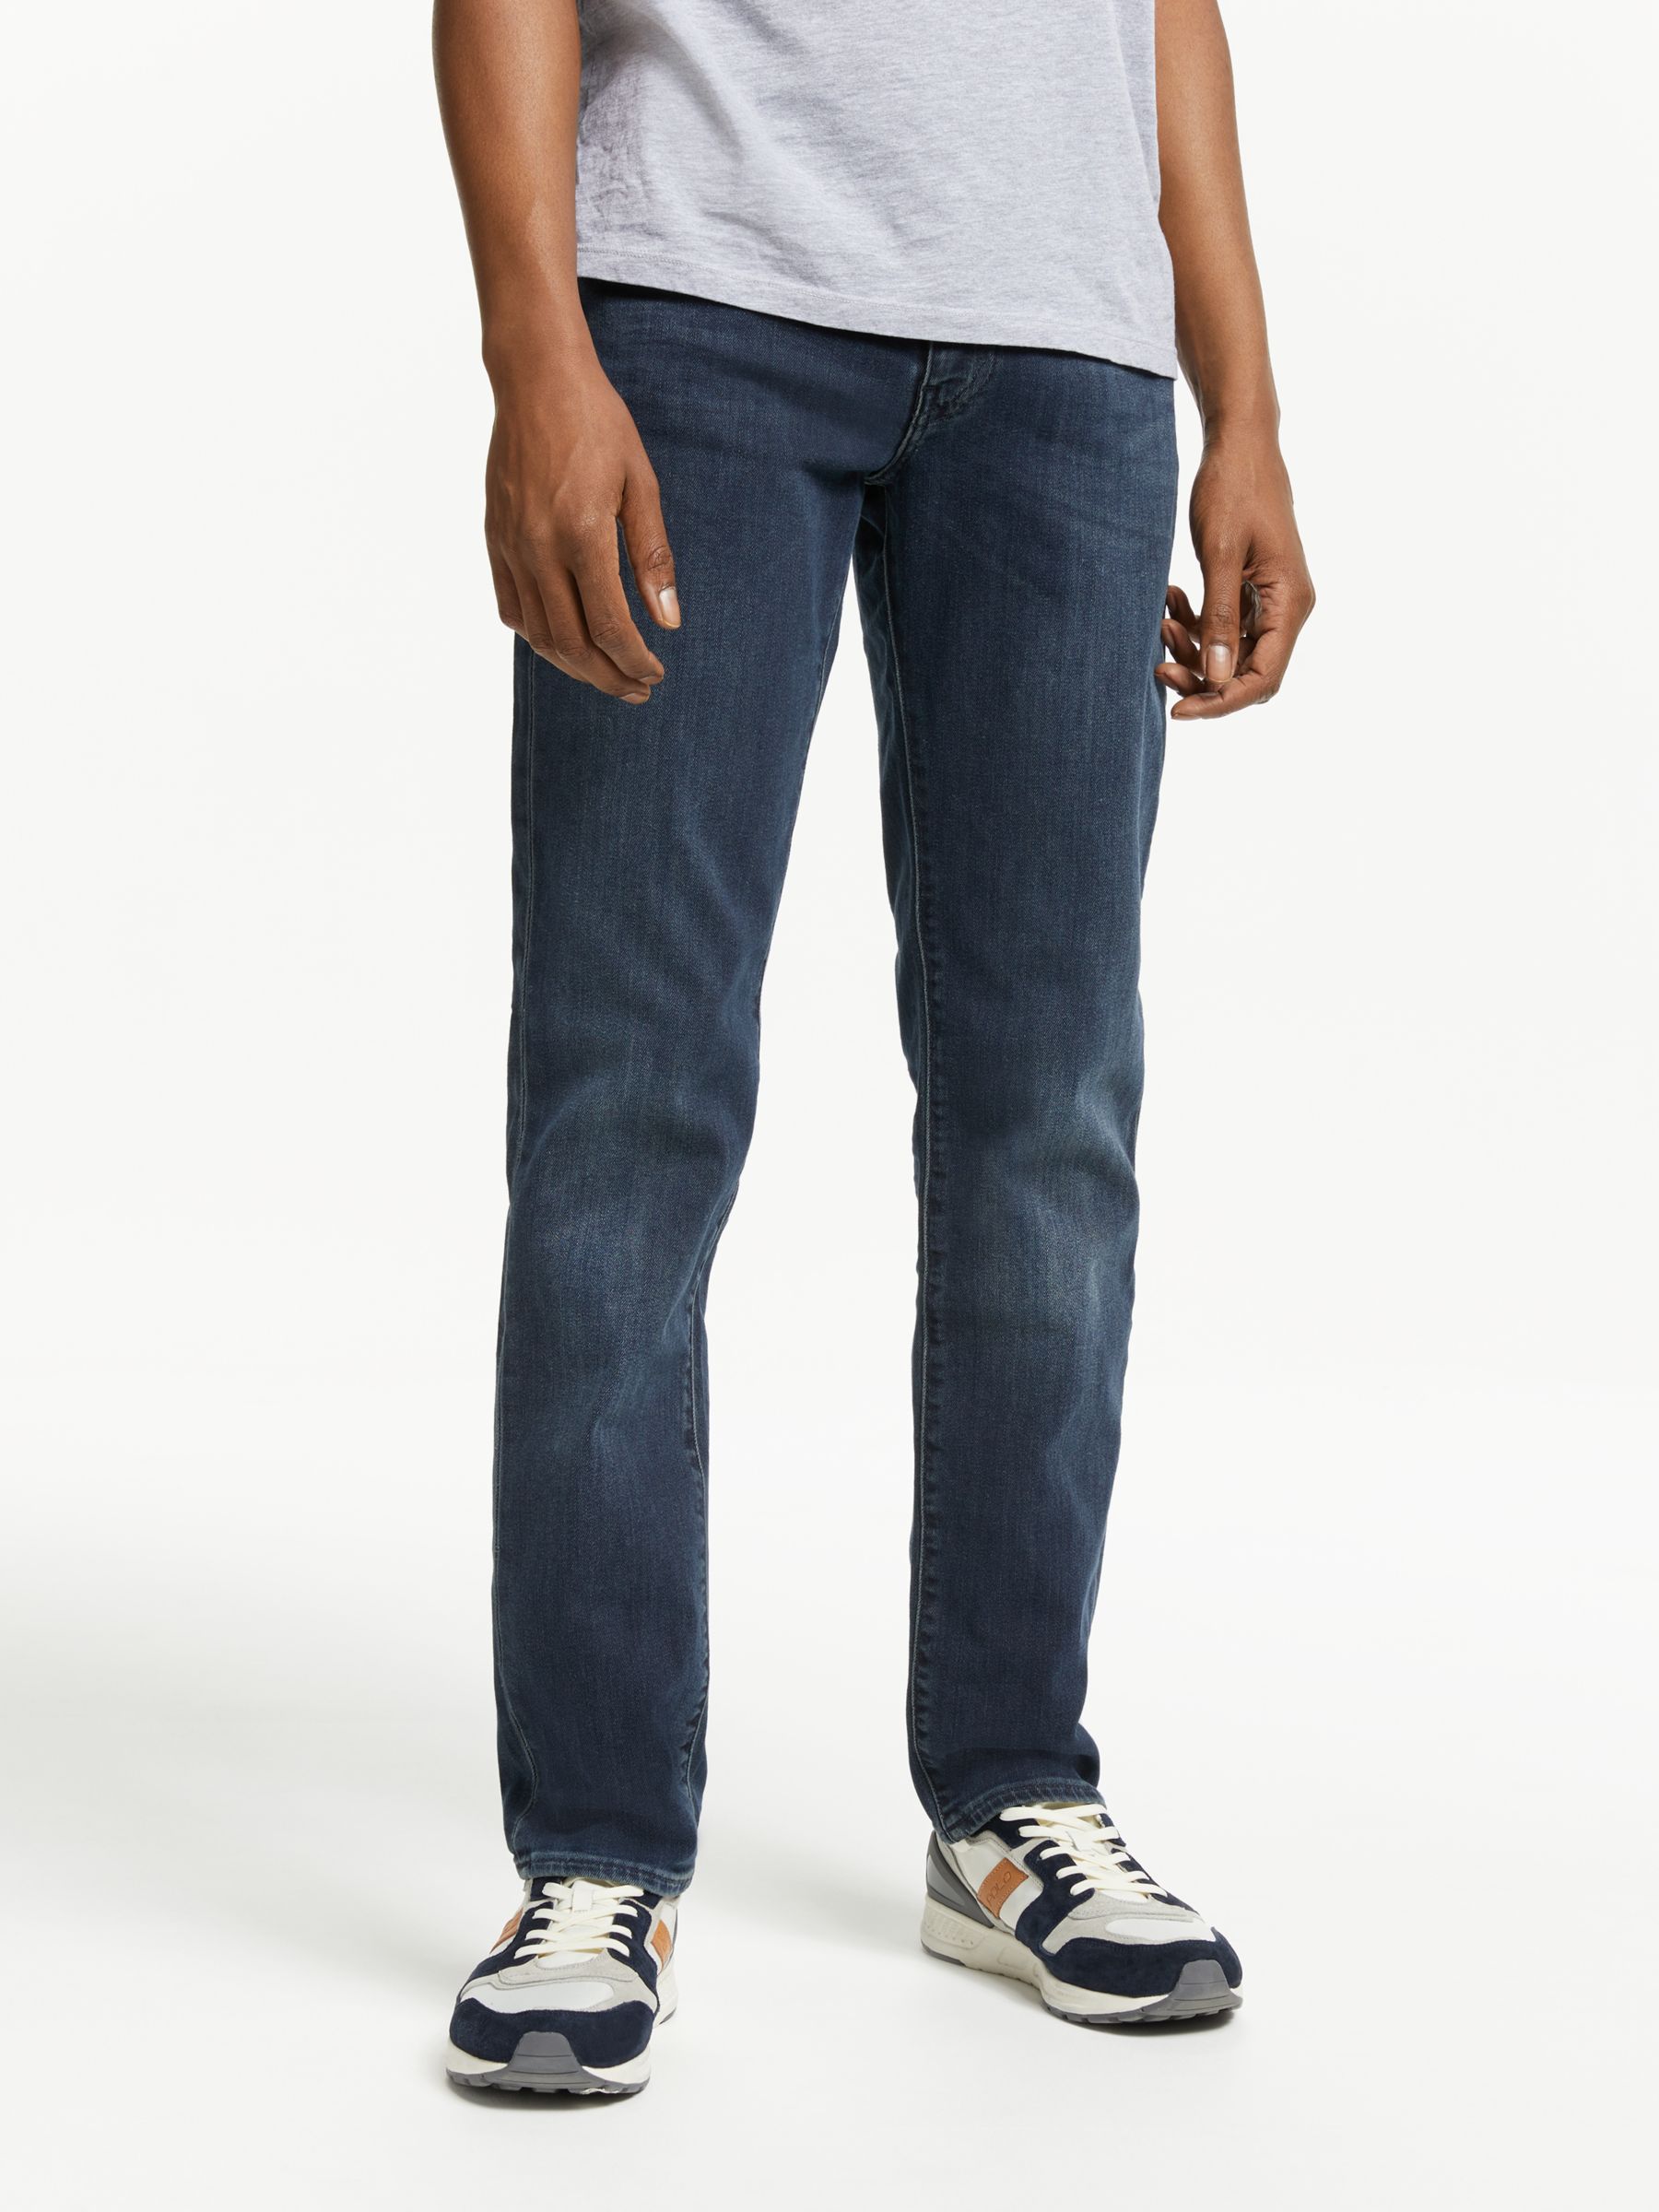 Levi's 511 Slim Fit Jeans, Headed South 